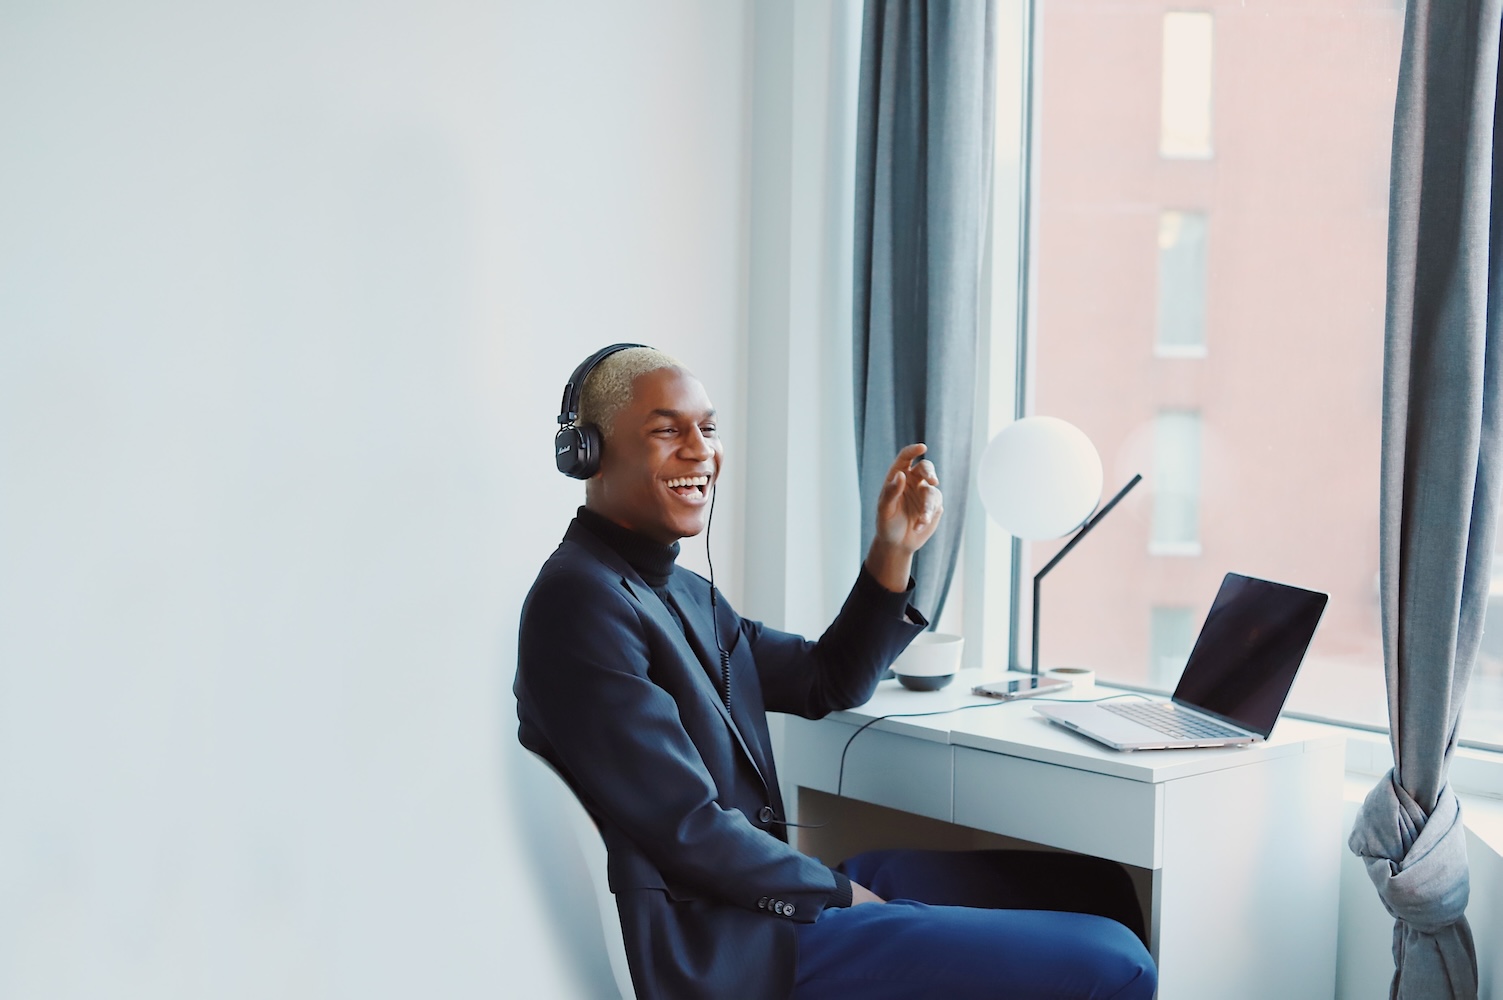 A photo of a person sitting at a desk by a window smiling while on a call.